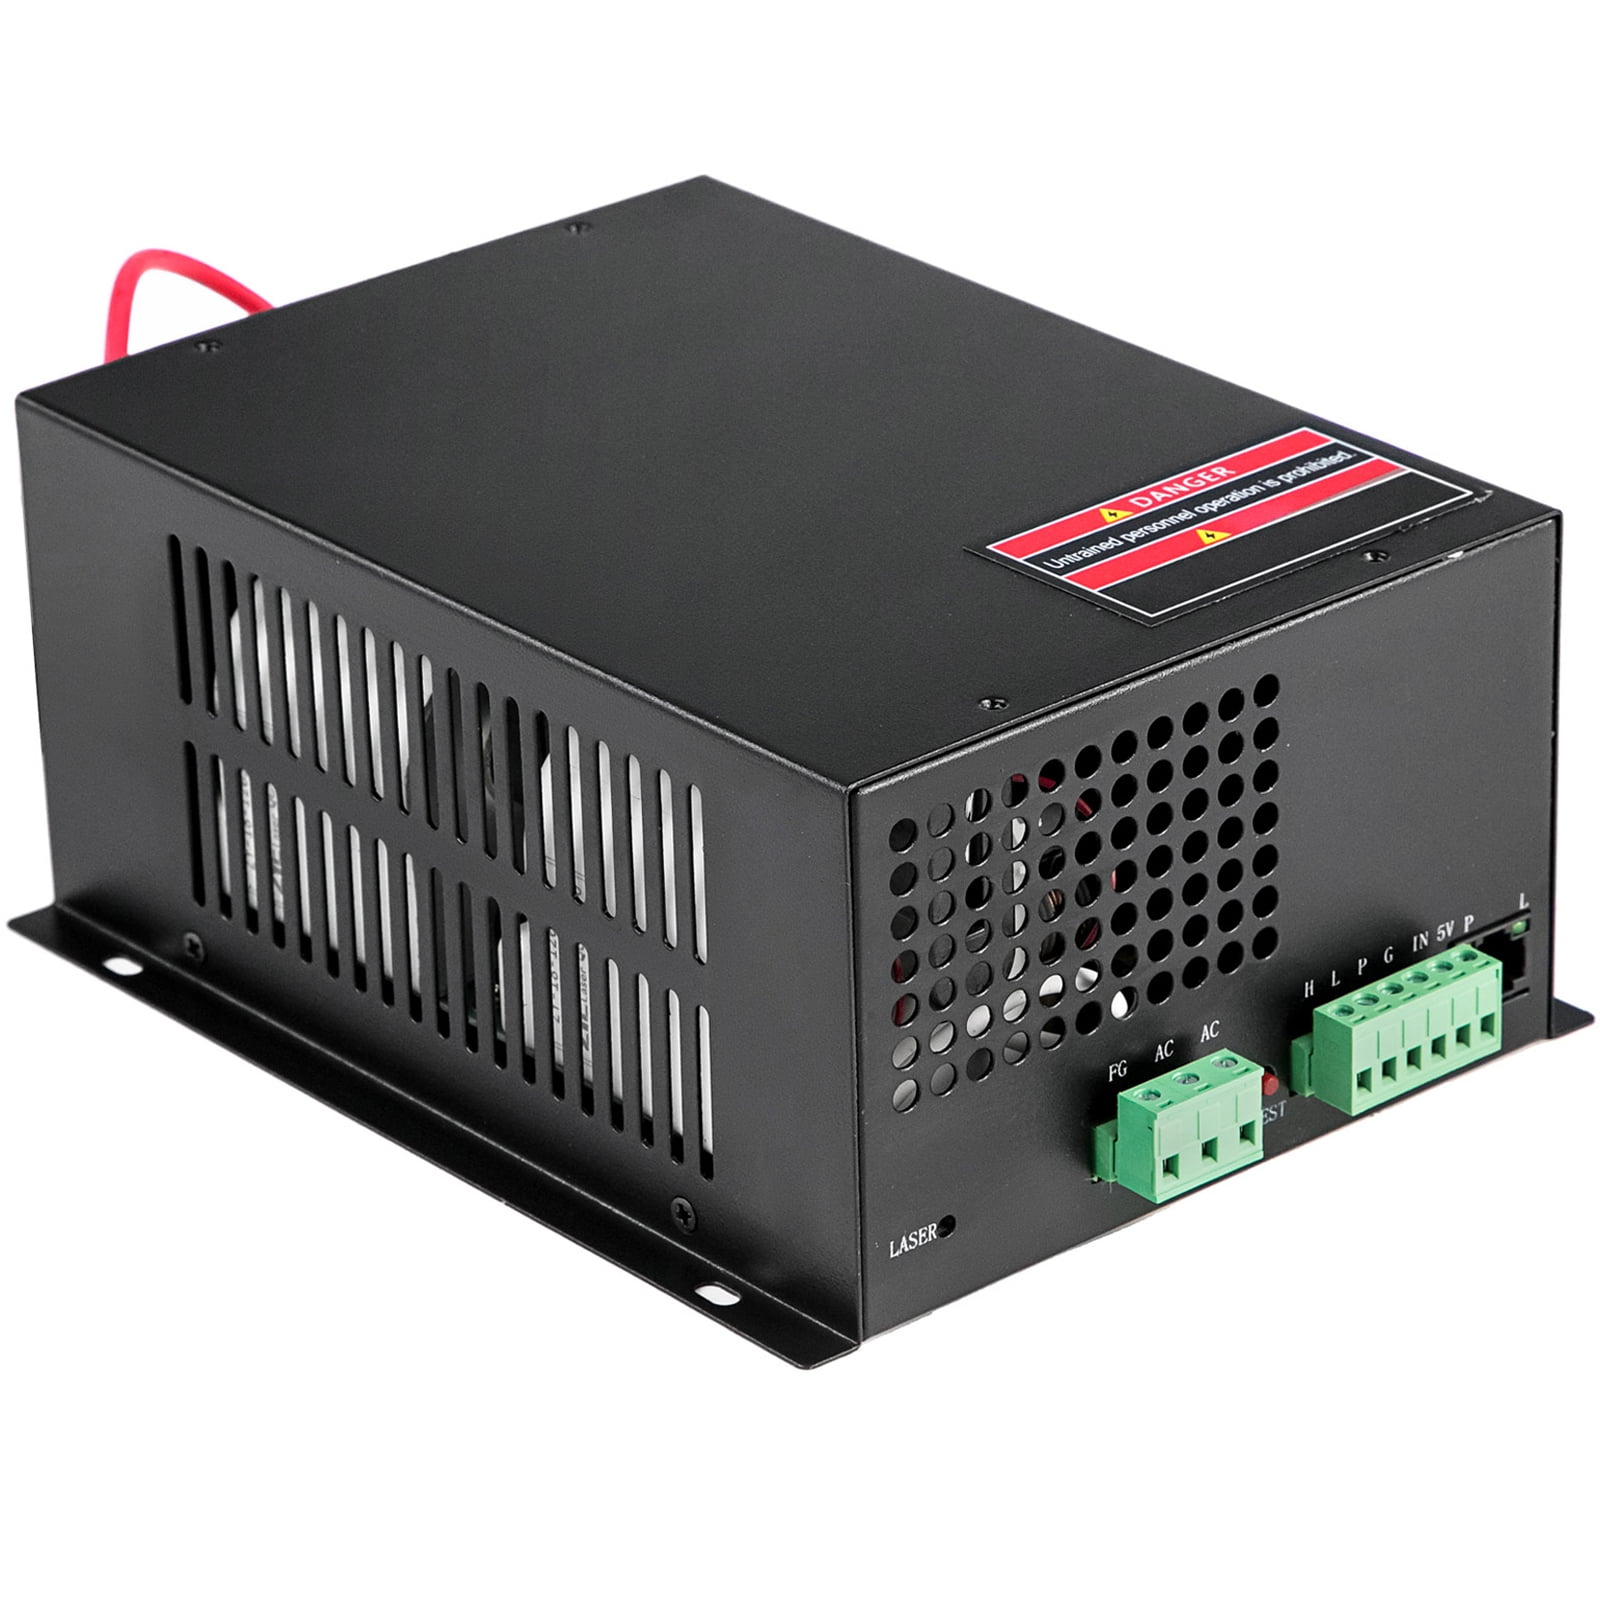 60W CO2 Laser Power Supply For Engraving Cutting Machine New vf 